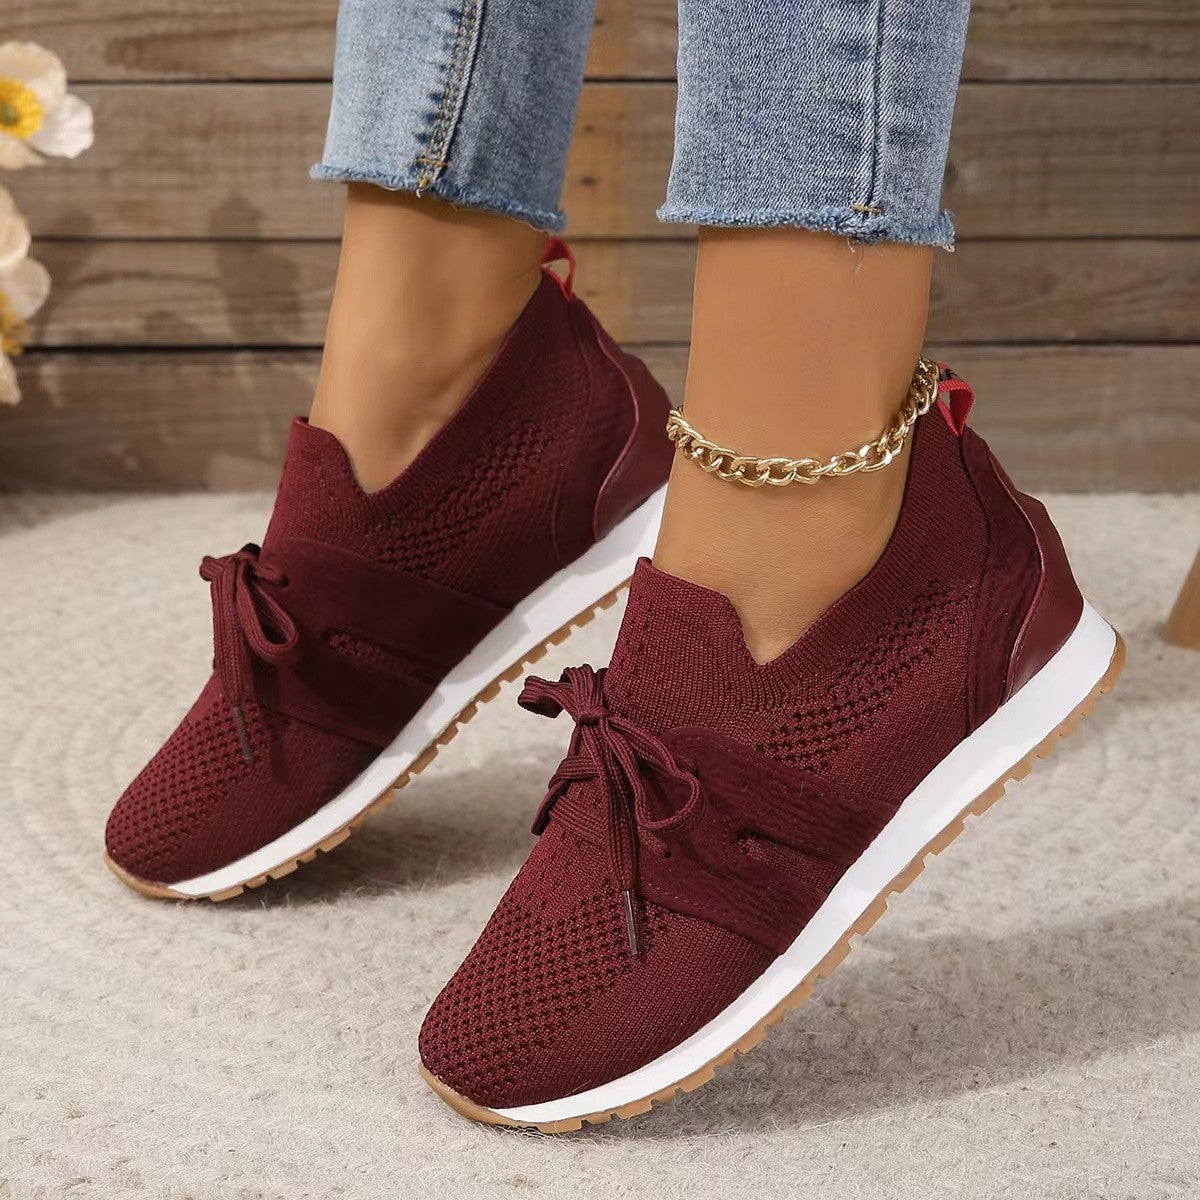 Lovemi -  Lace Up Mesh Flats Shoes For Women Breathable Casual Breathable Walking Wedges Shoes